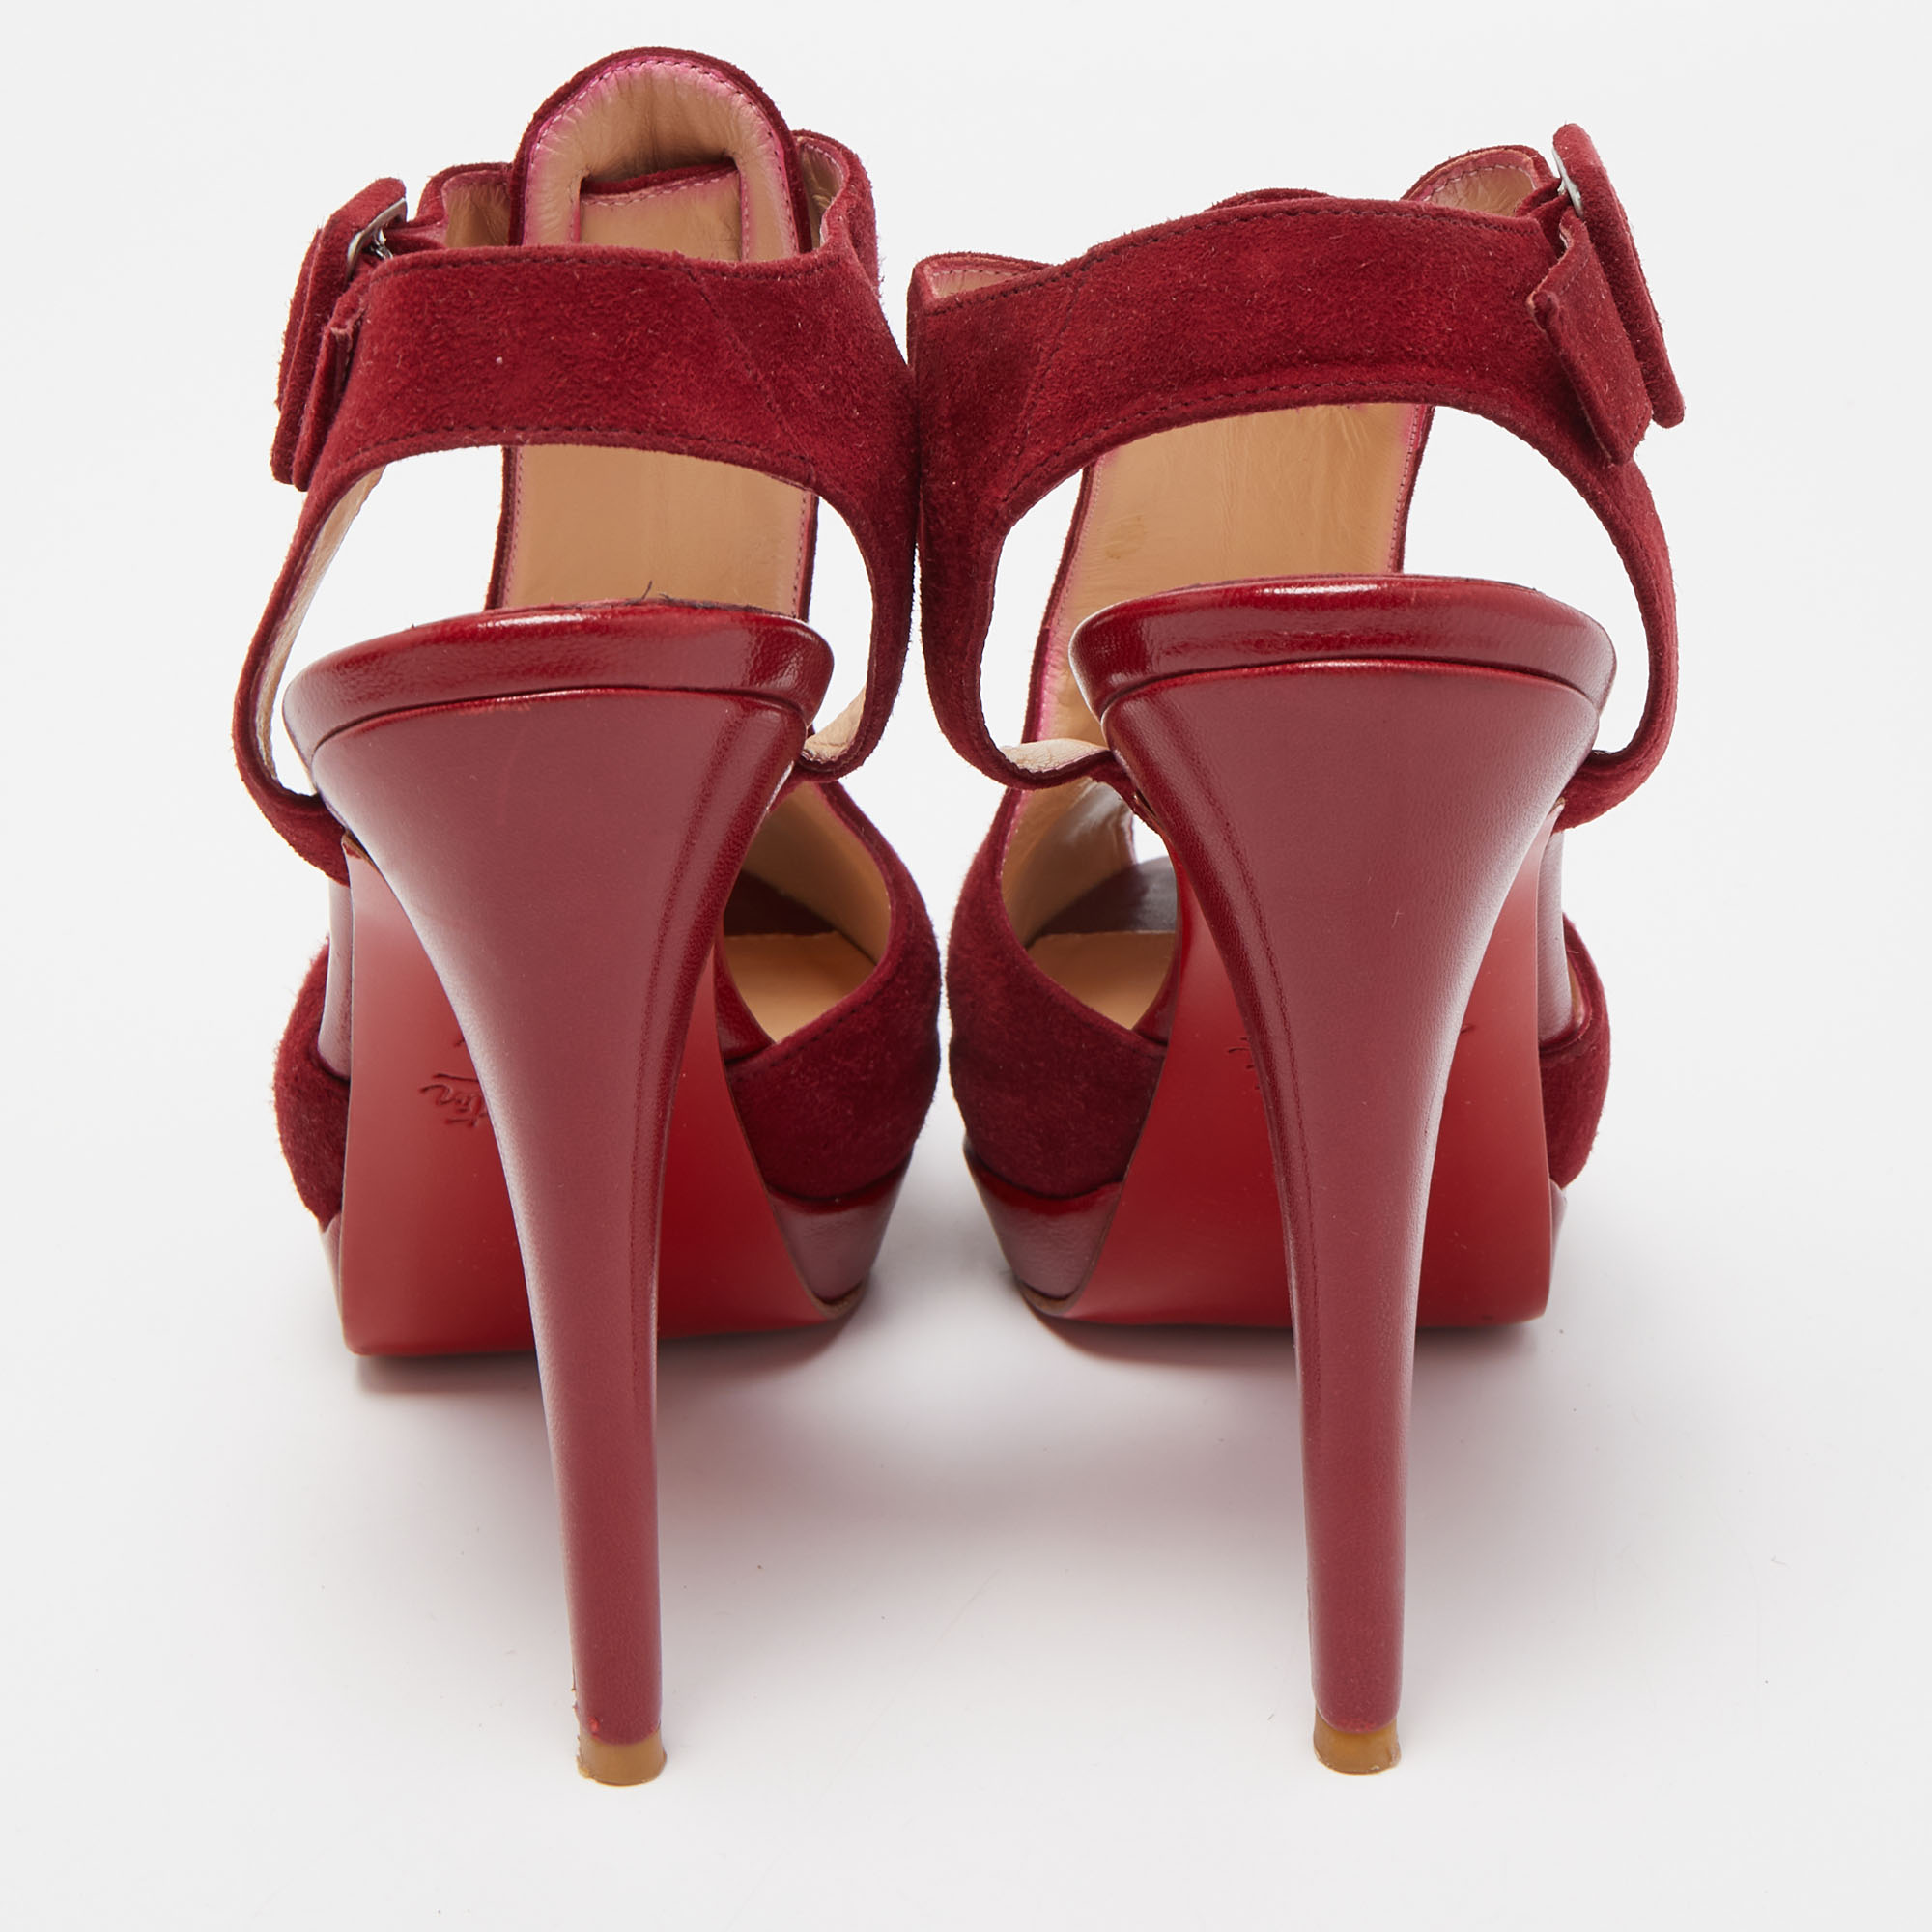 Christian Louboutin Red Suede Peep Toe Platform Sandals Size 37